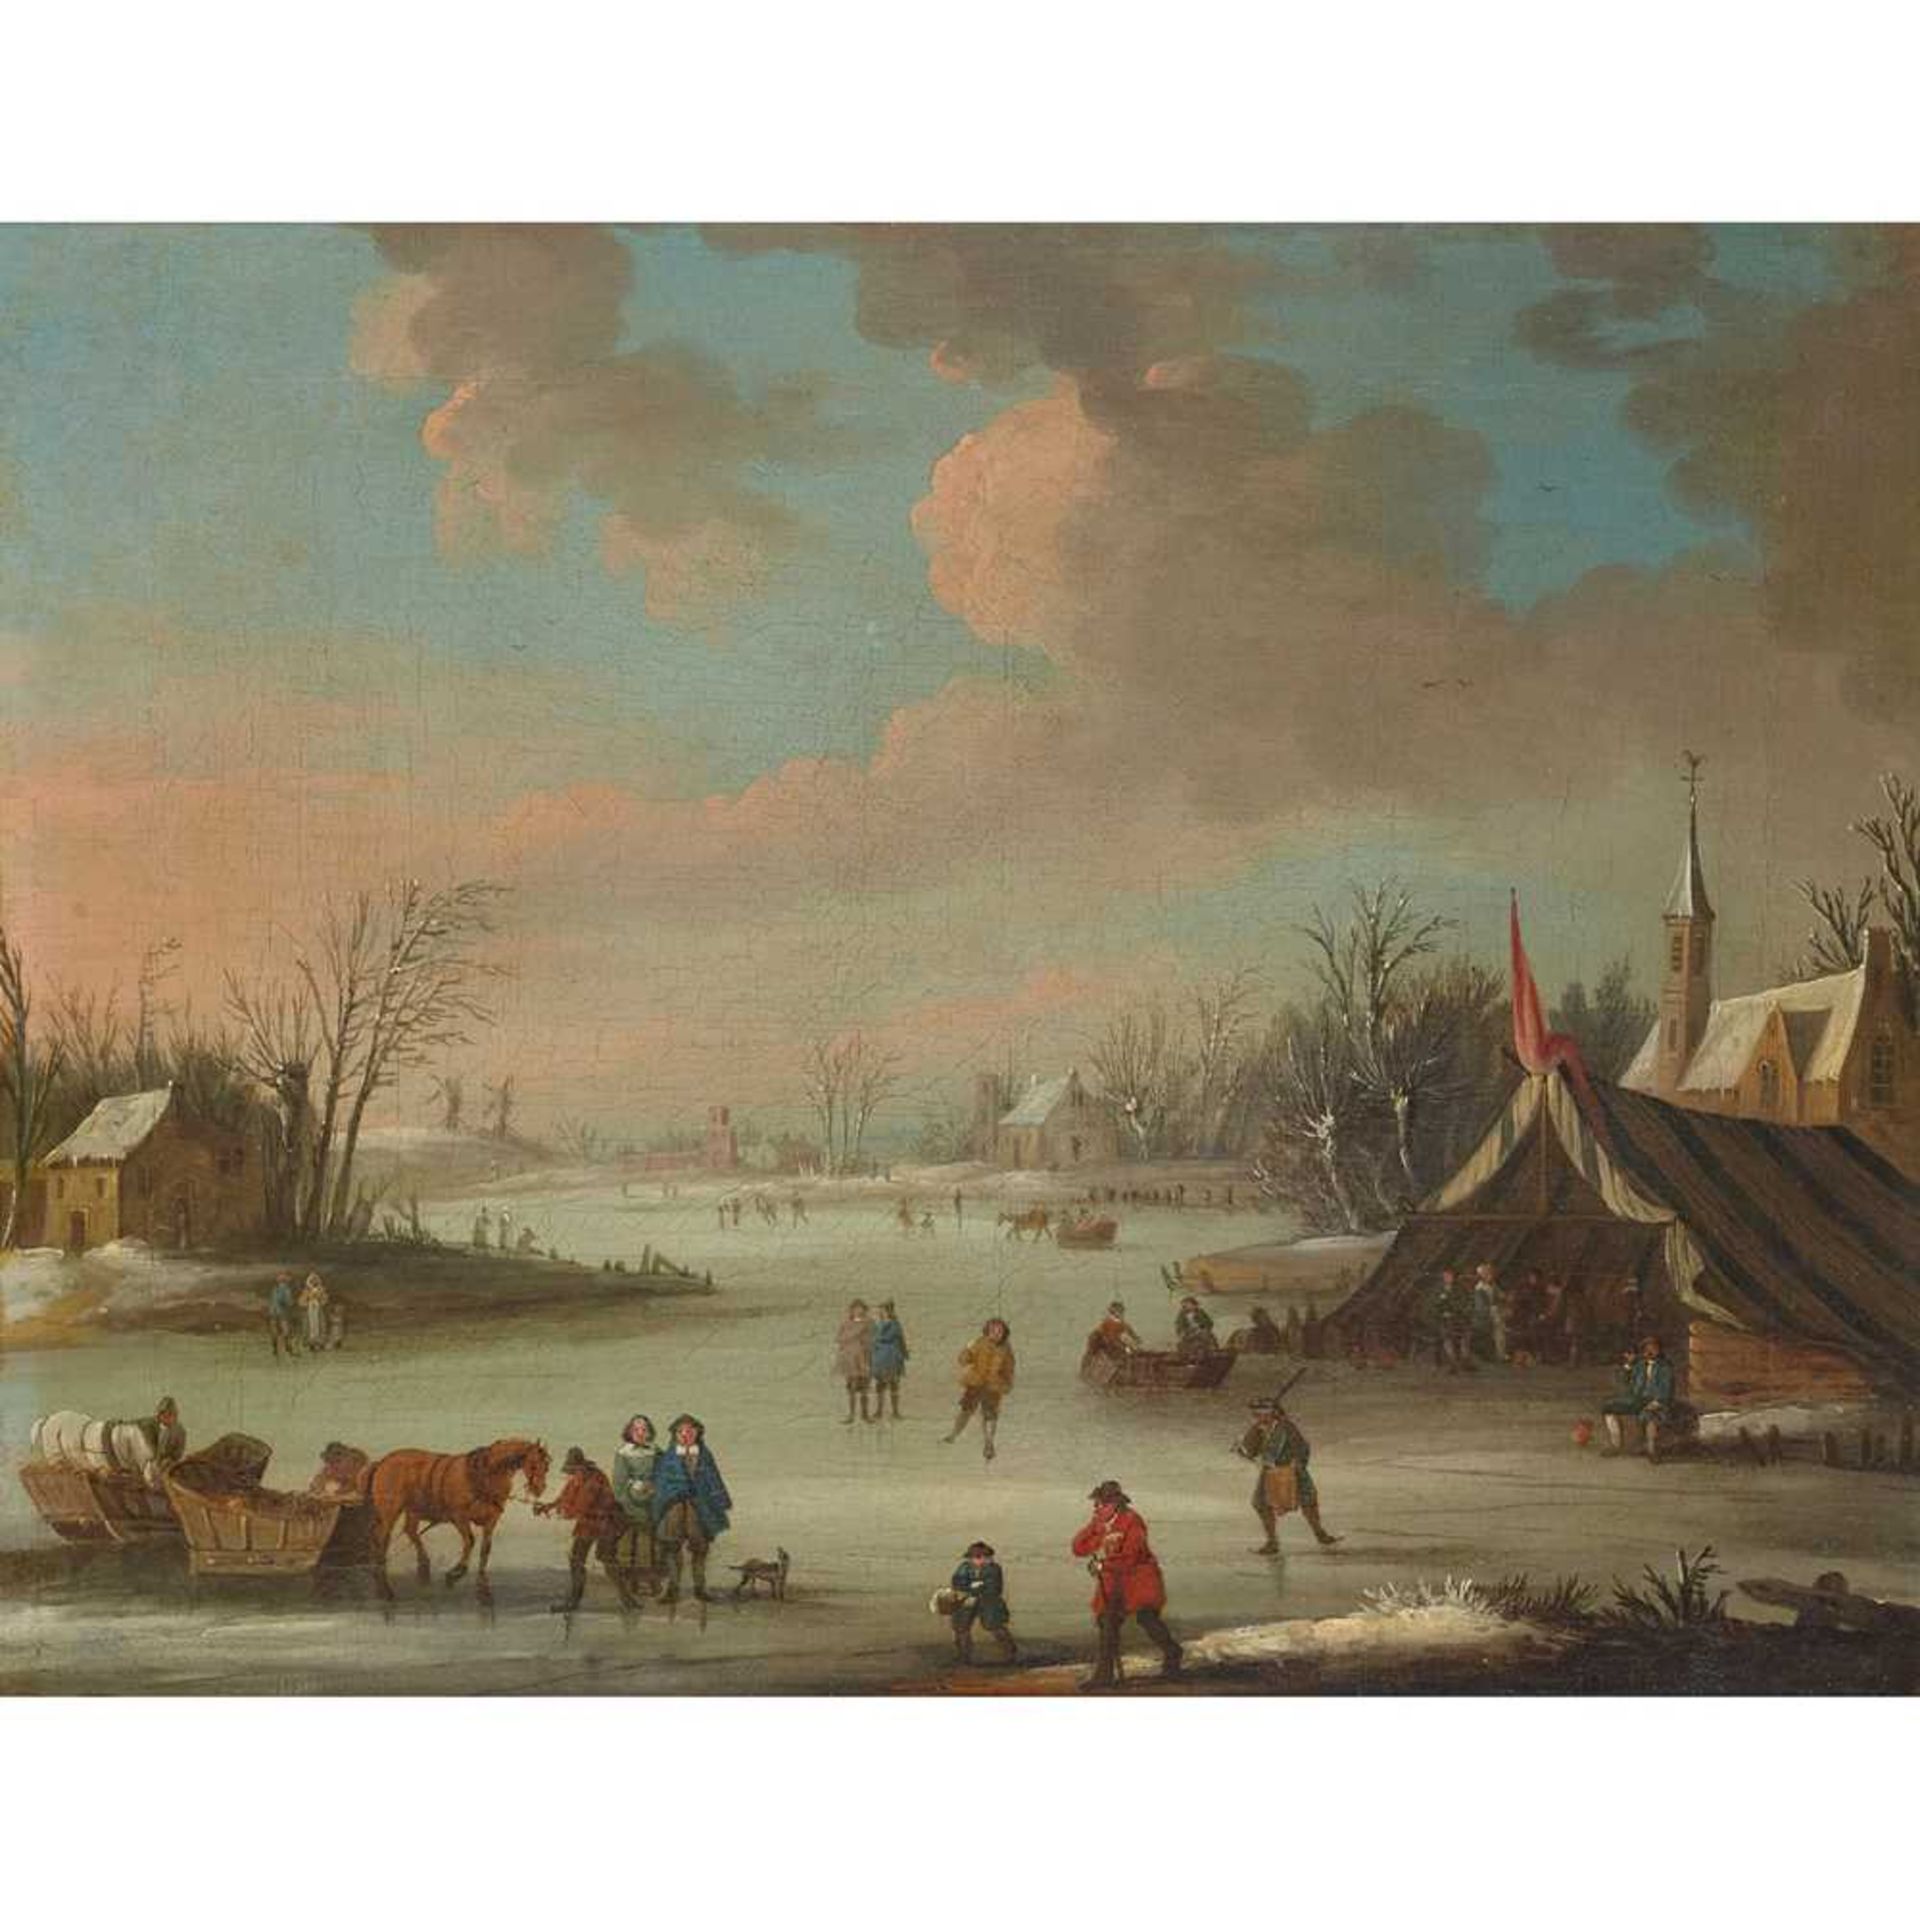 FOLLOWER OF ANDRIES VERMEULEN A WINTER LANDSCAPE WITH FIGURES AND SKATERS ON A FROZEN LAKE